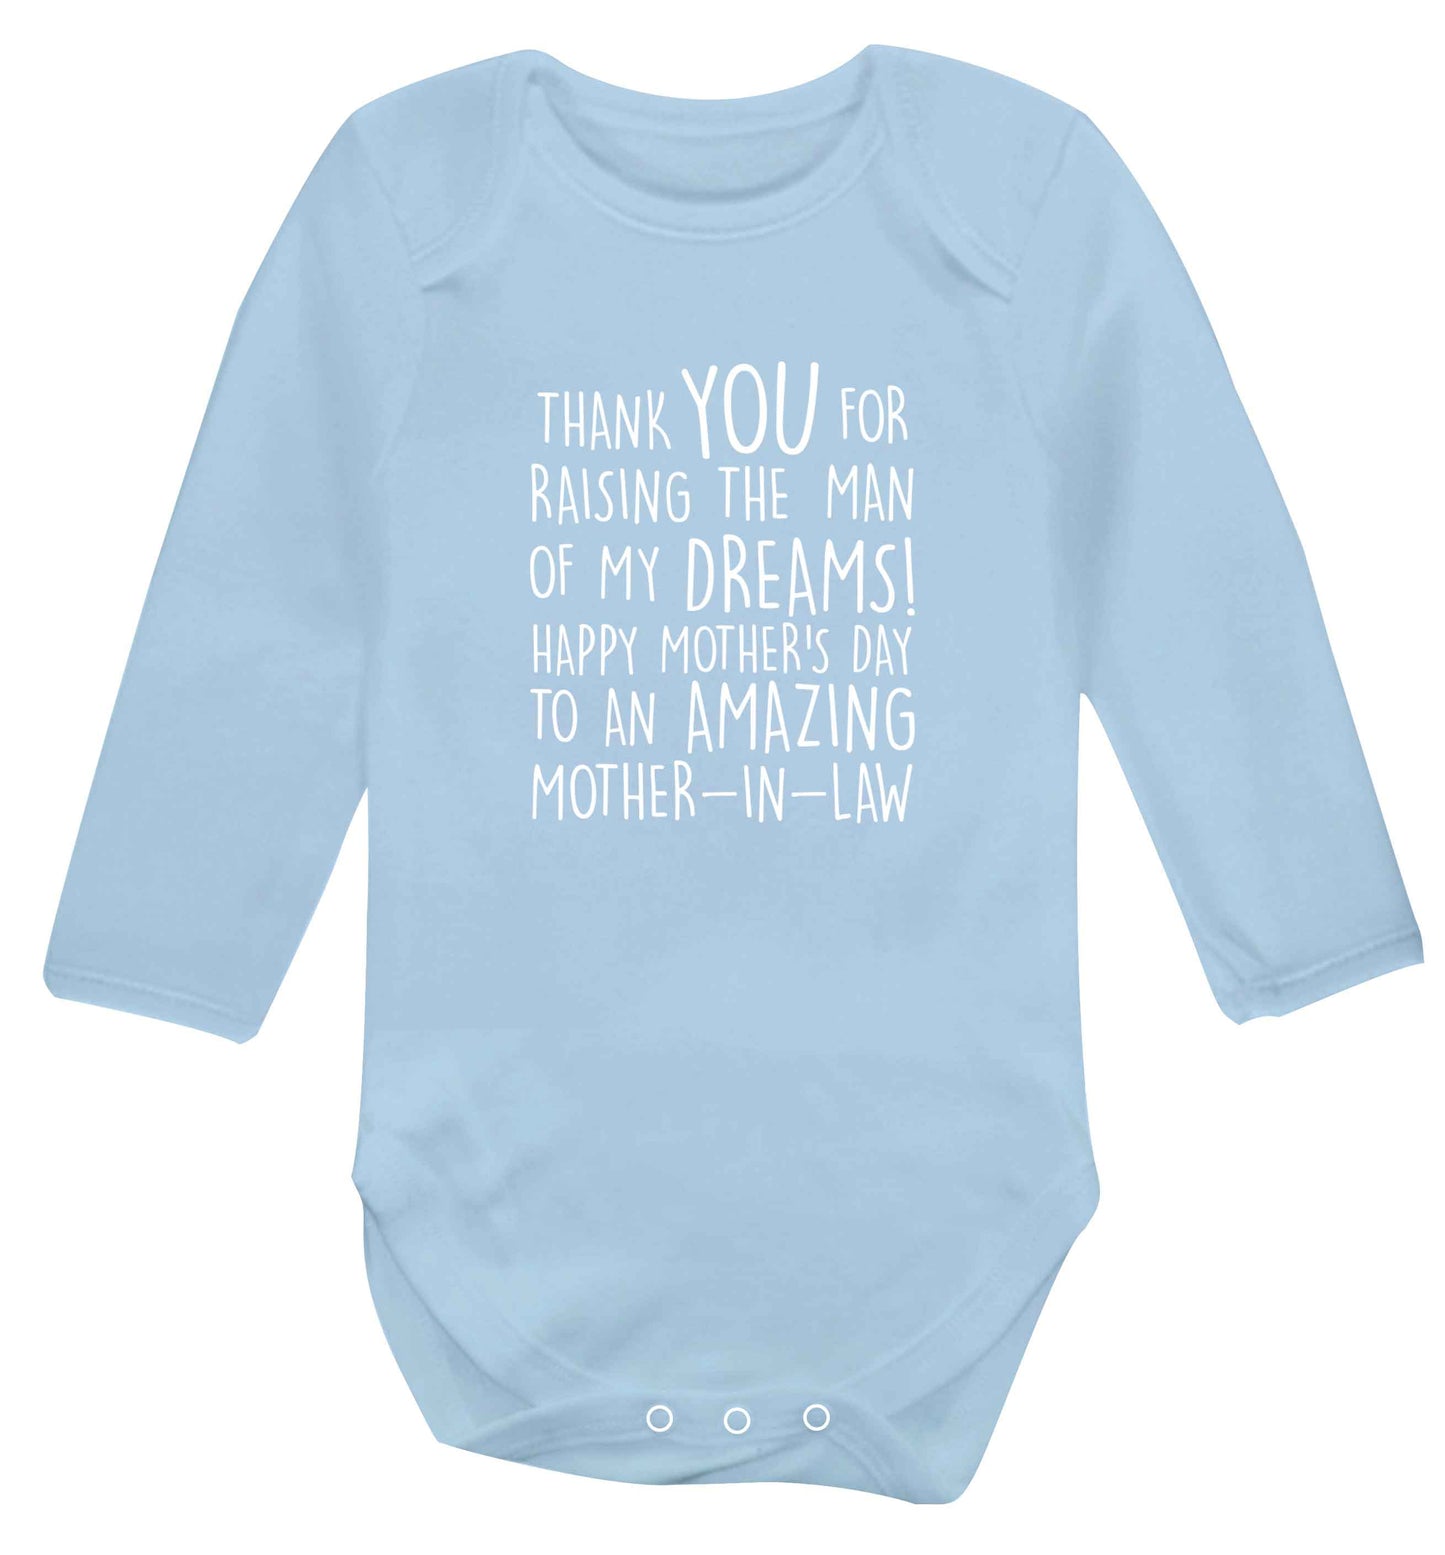 Raising the man of my dreams mother's day mother-in-law baby vest long sleeved pale blue 6-12 months